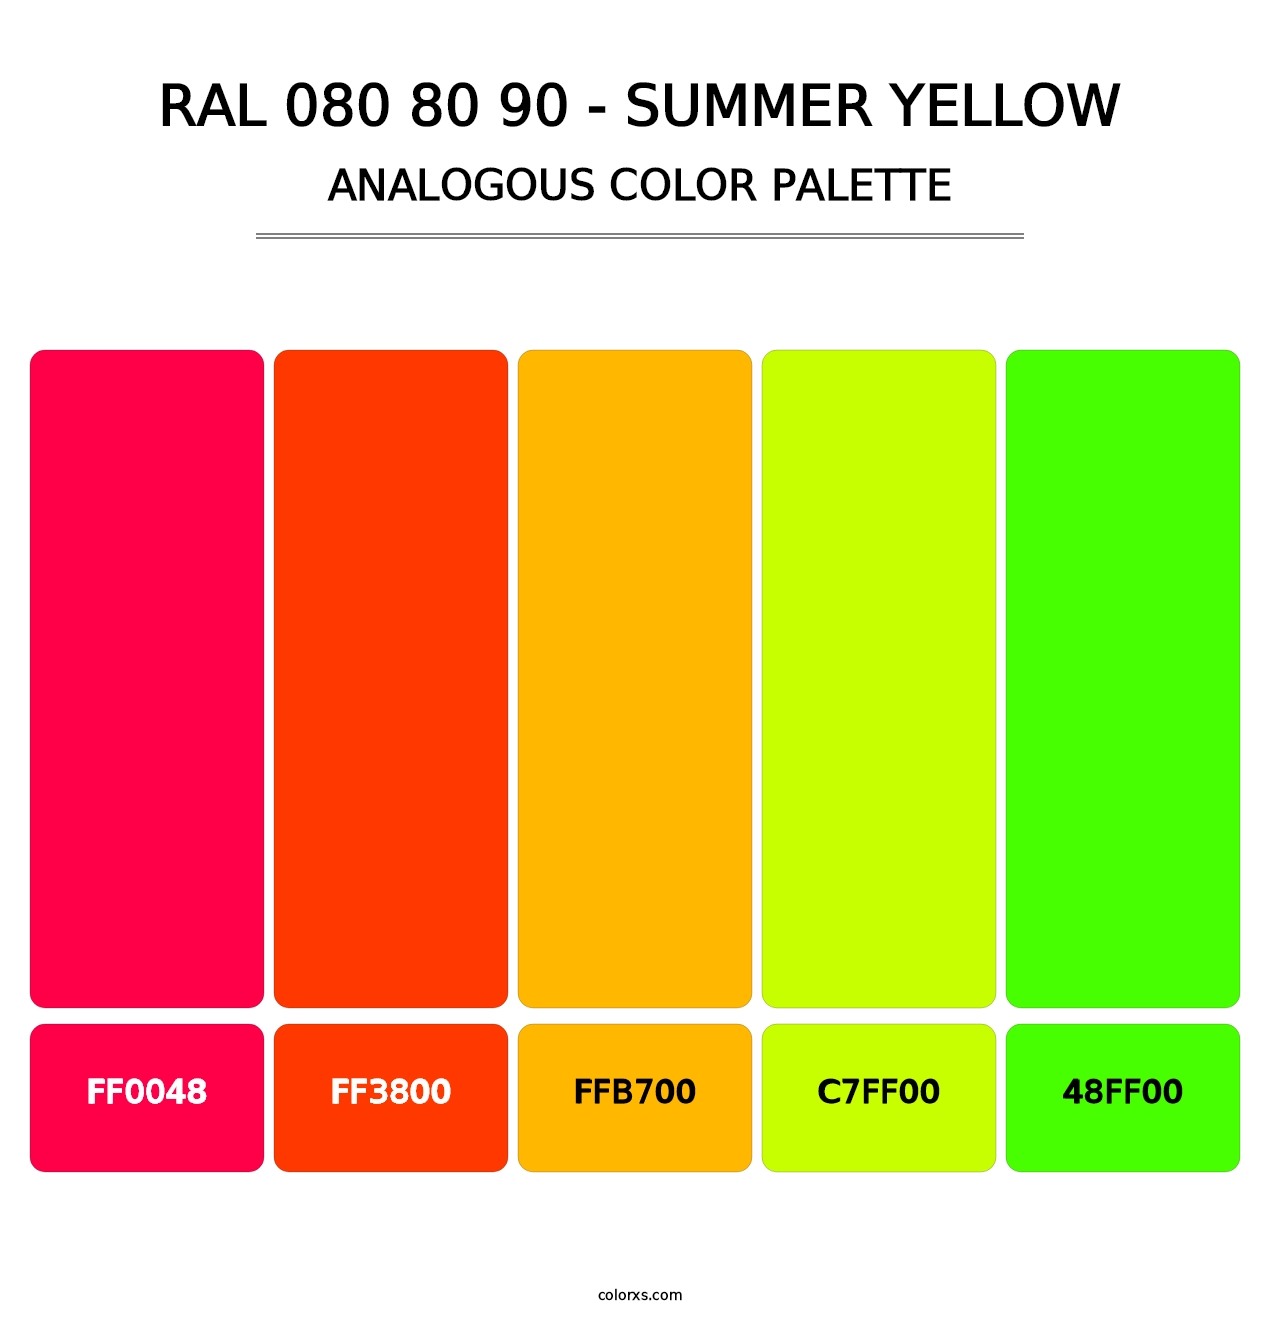 RAL 080 80 90 - Summer Yellow - Analogous Color Palette